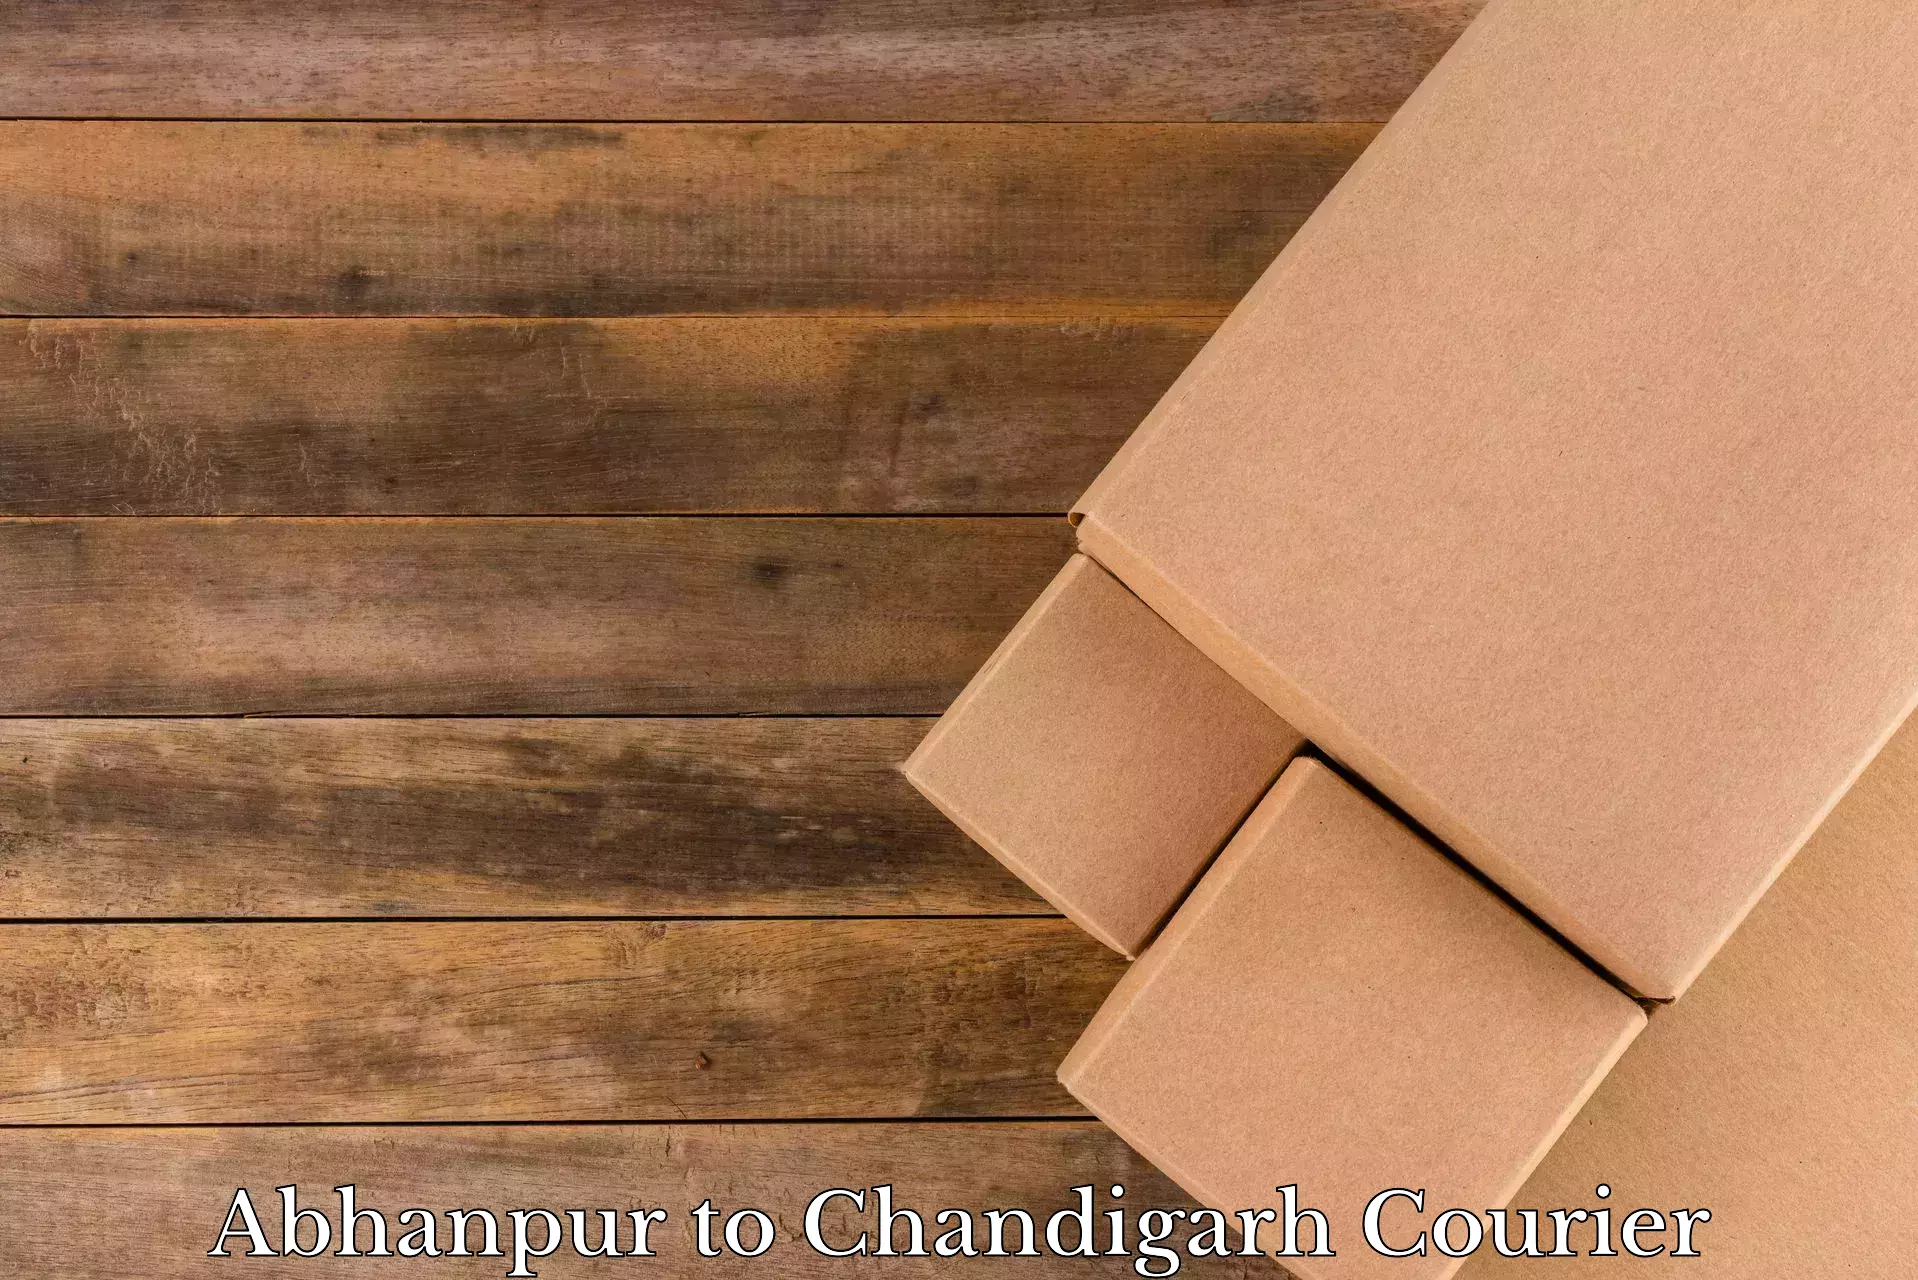 Home relocation experts Abhanpur to Chandigarh